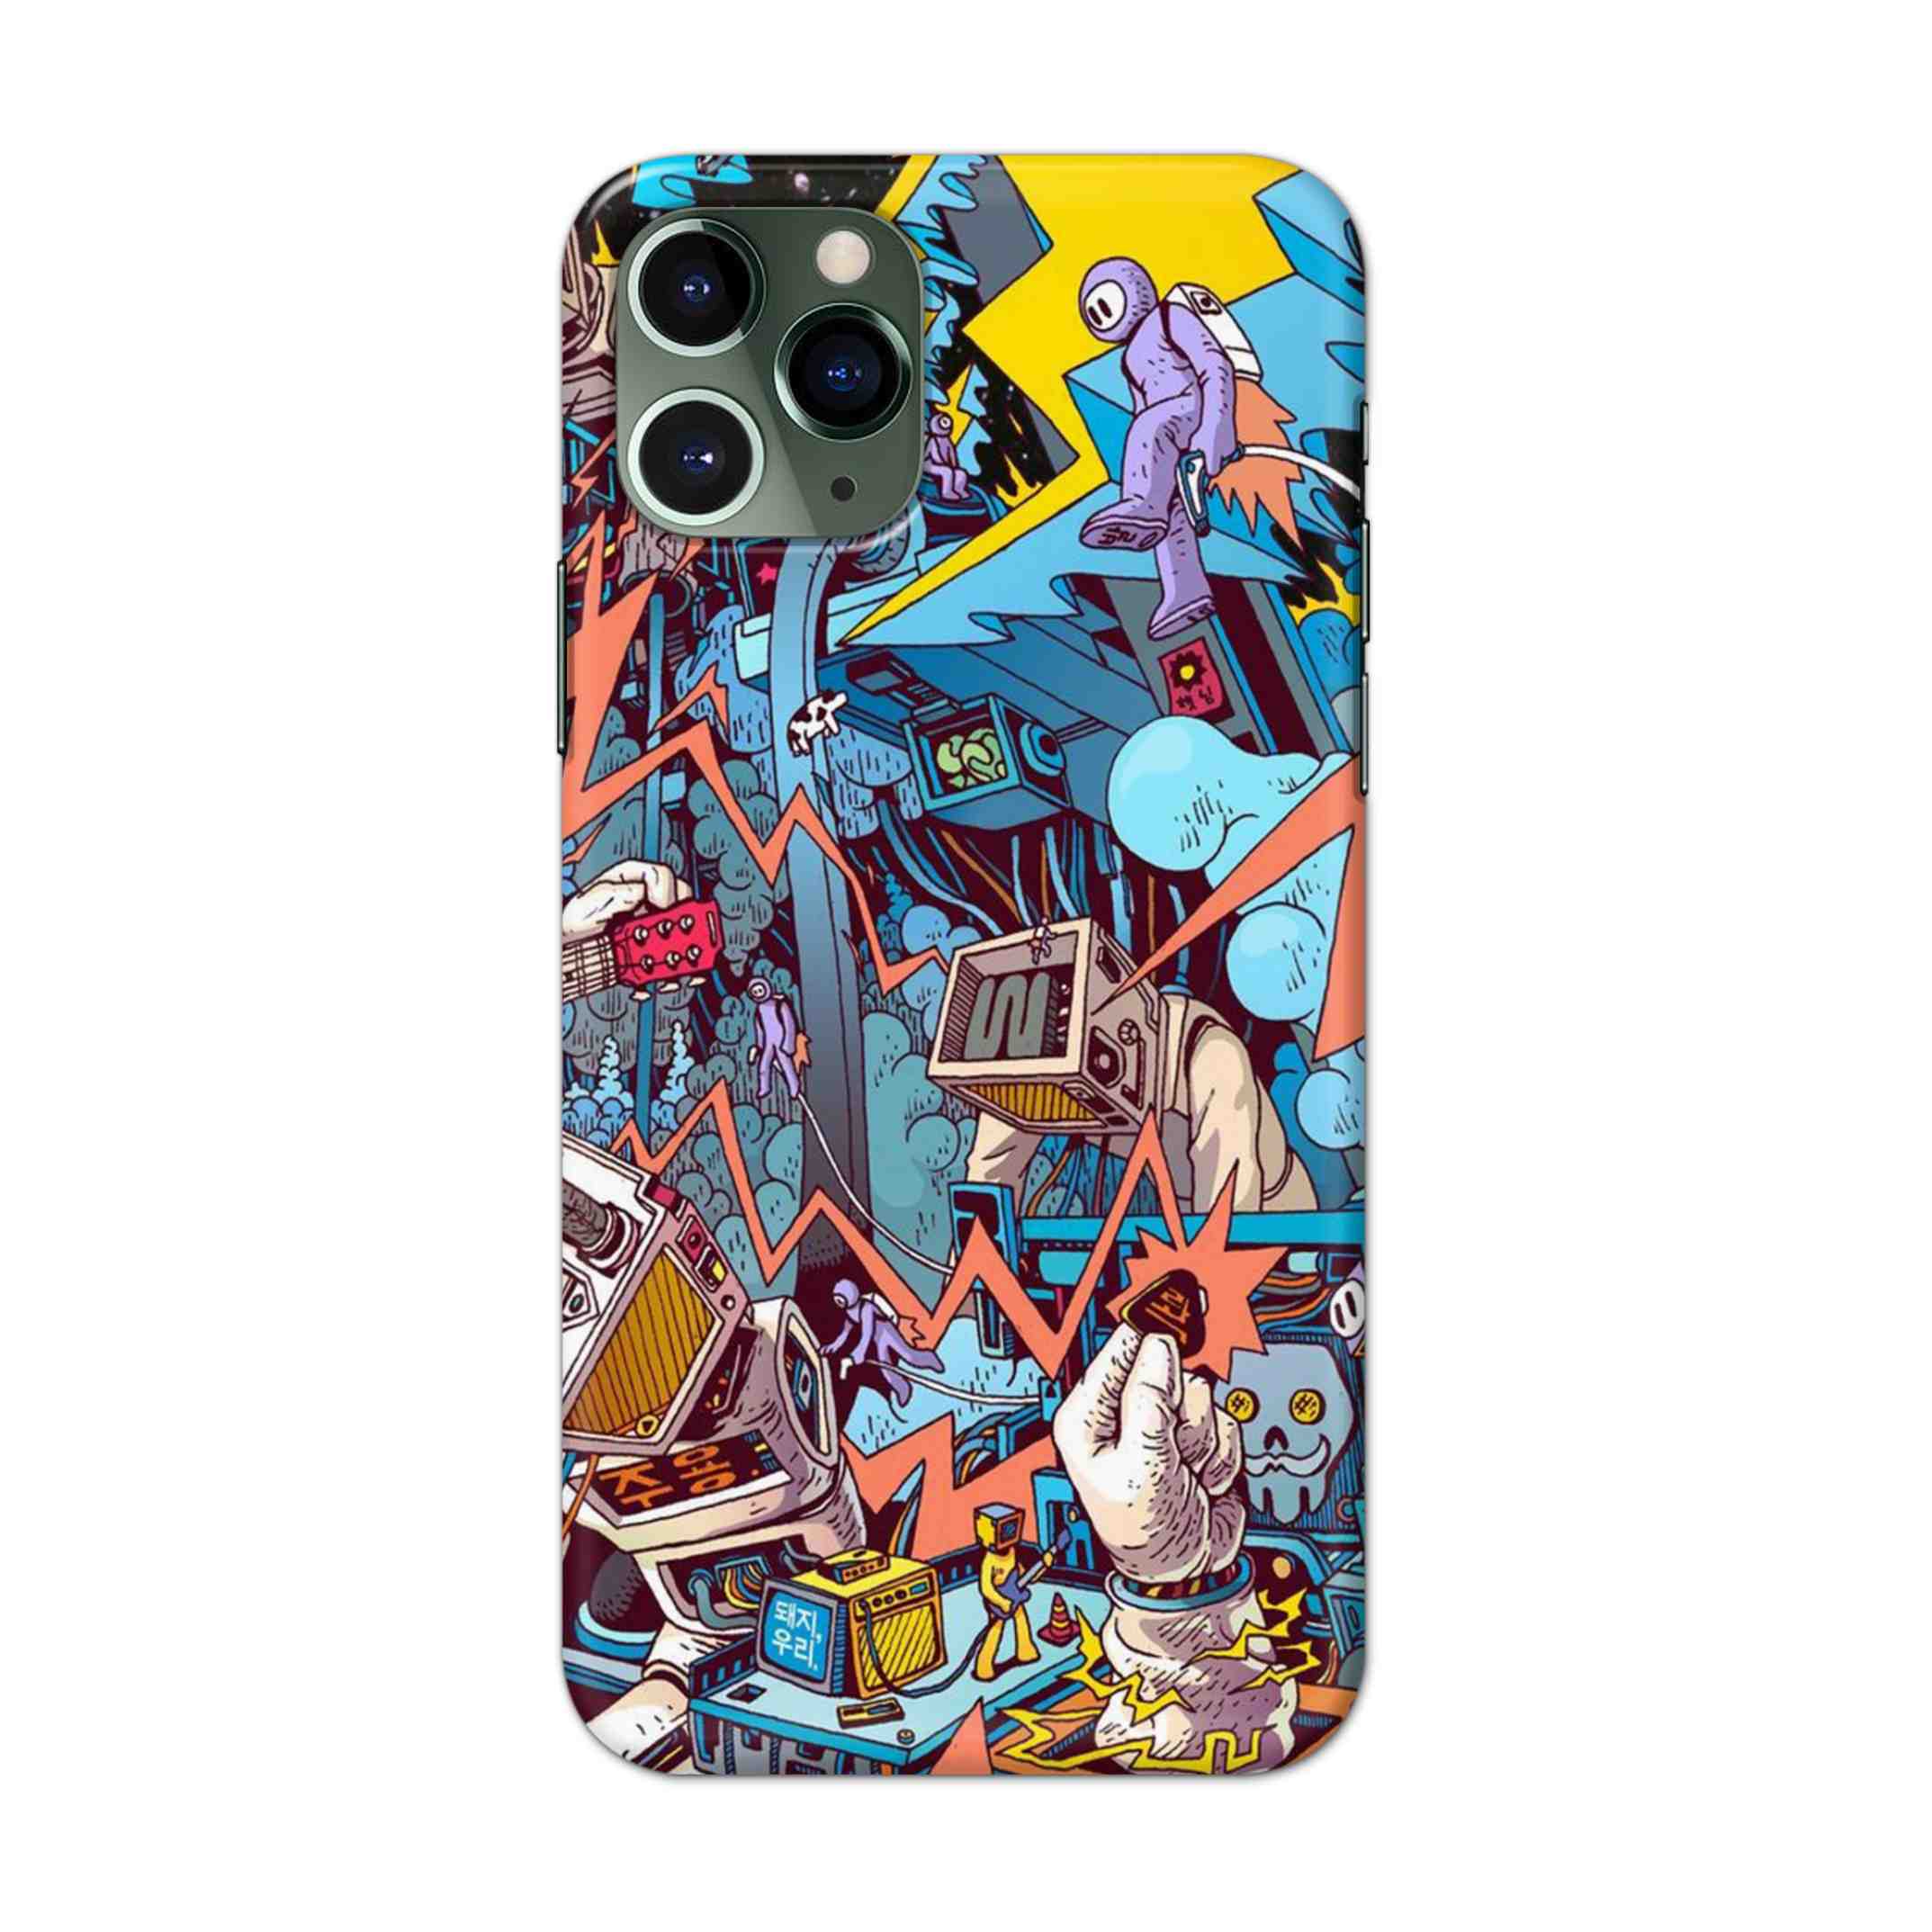 Buy Ofo Panic Hard Back Mobile Phone Case/Cover For iPhone 11 Pro Online